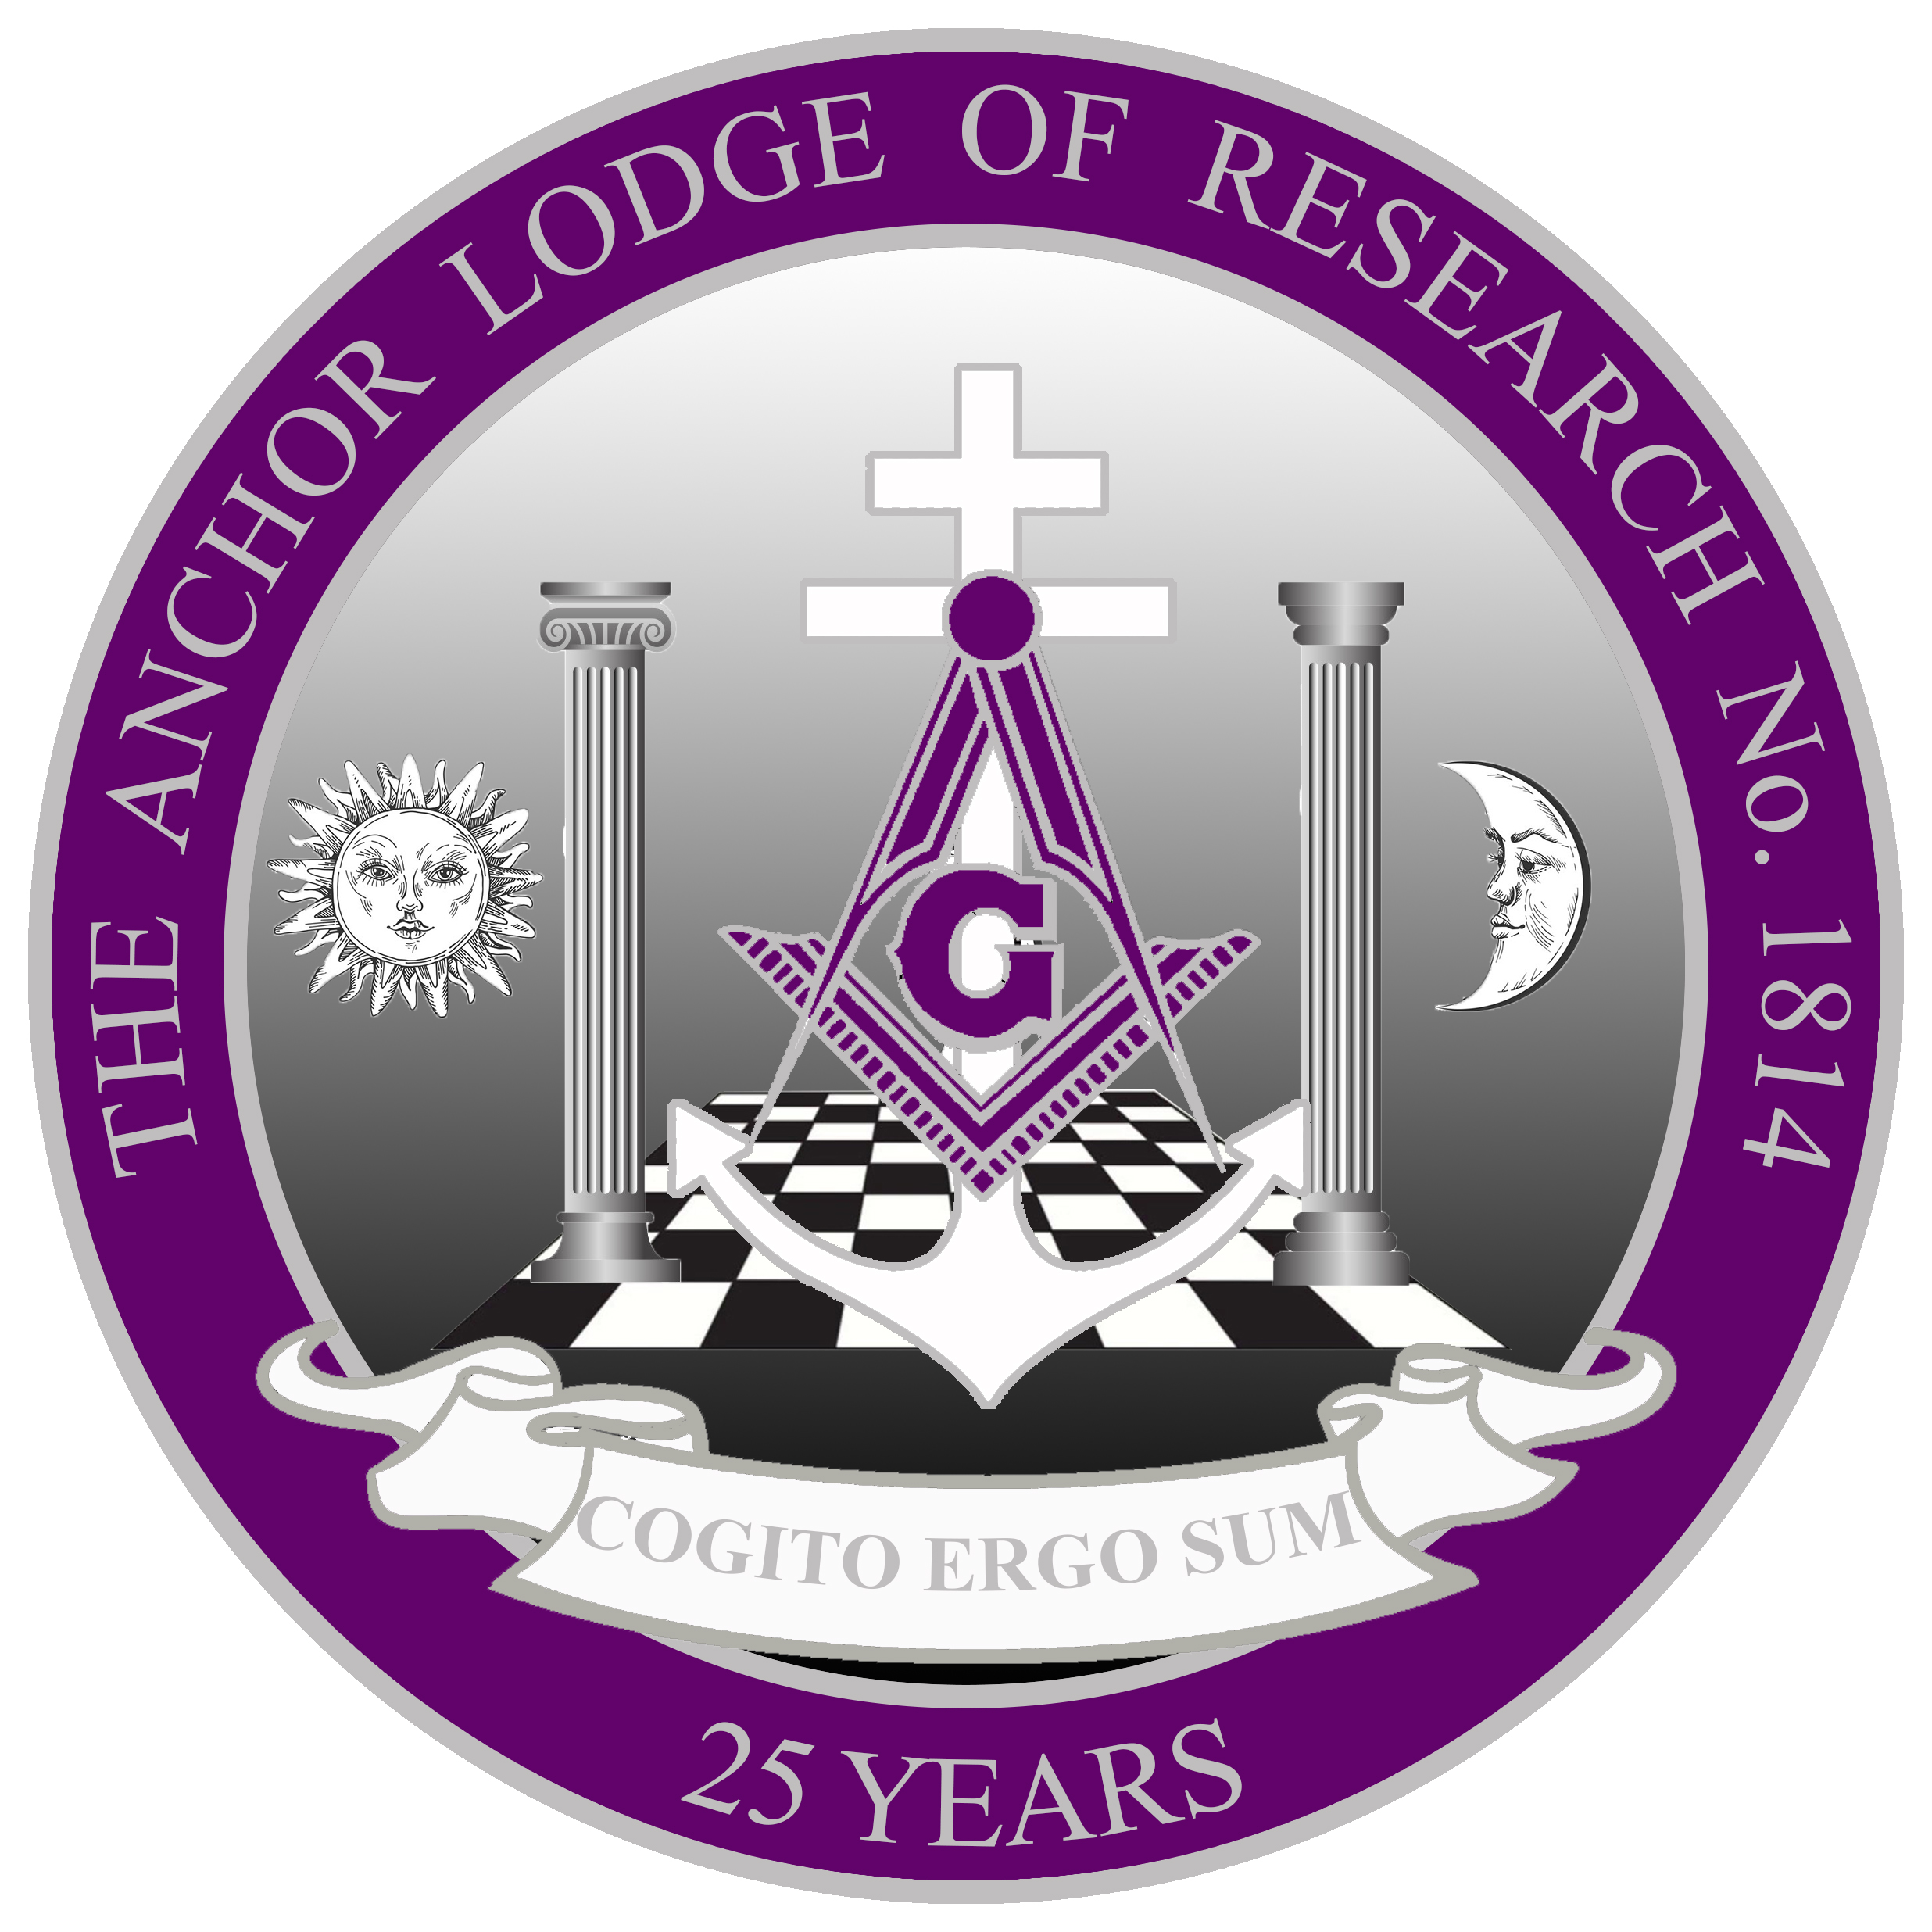 The Anchor Lodge of Research